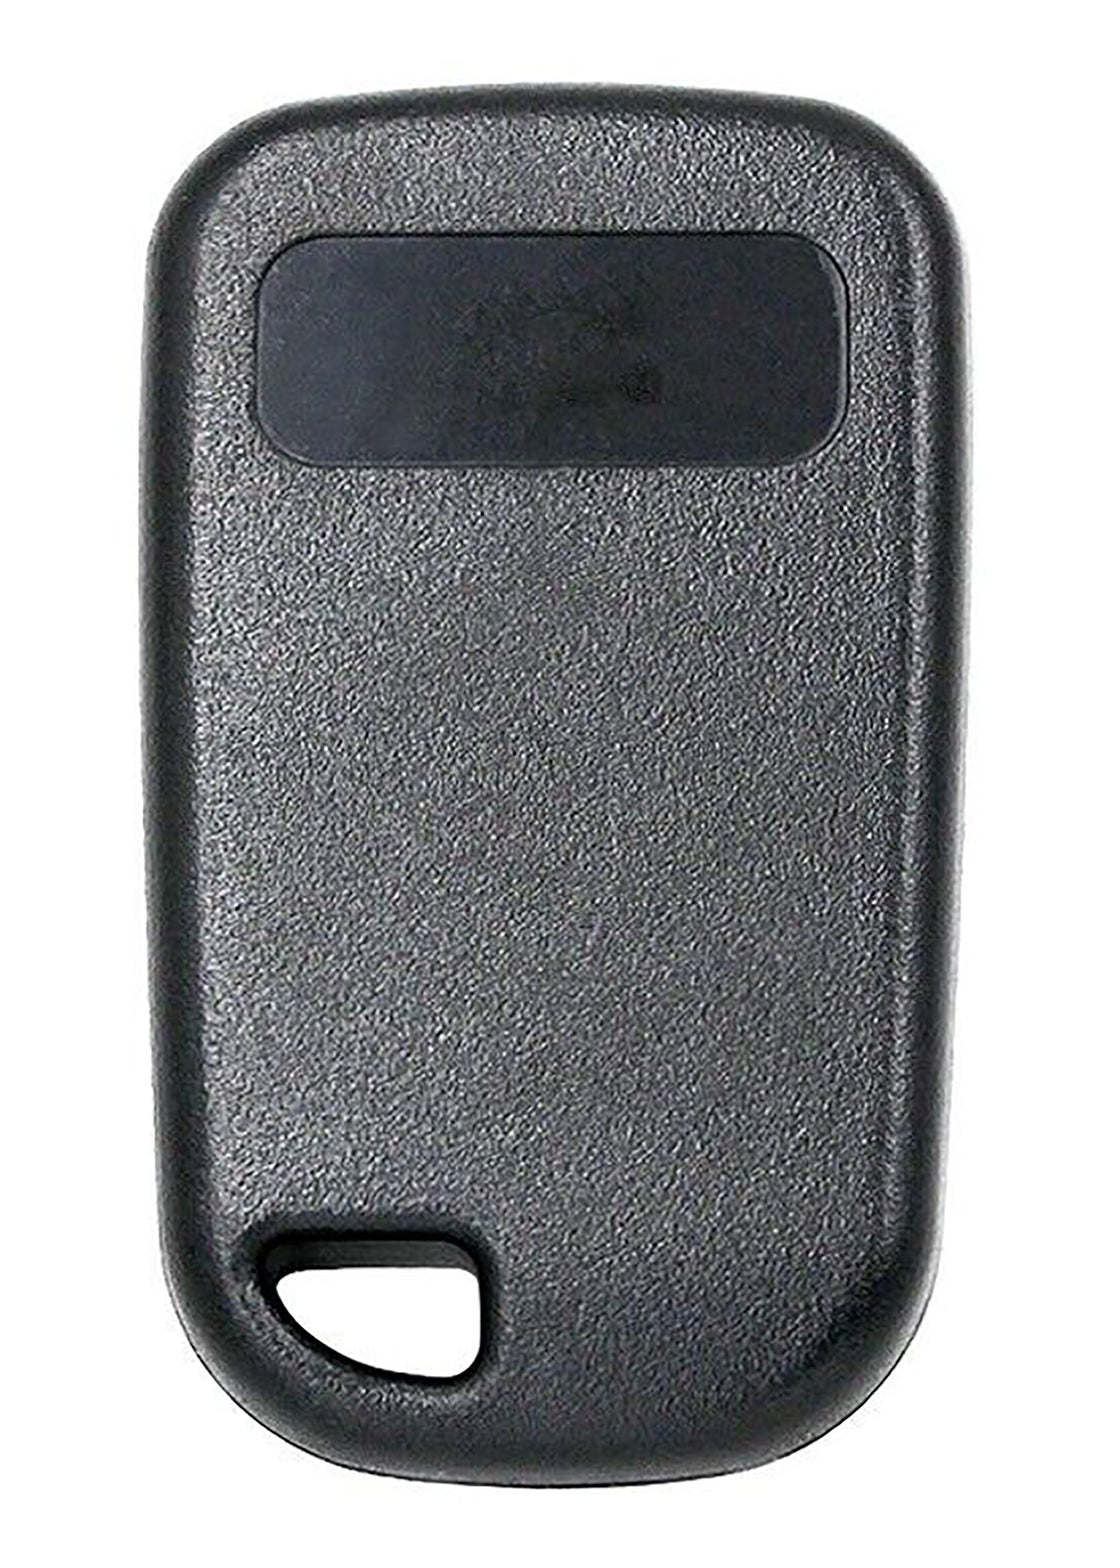 1x New Replacement Key Fob Compatible with & Fit For 2001 2002 2003 2004 Honda Odyssey 315 MHz - MPN OUCG8D-440H-A-02